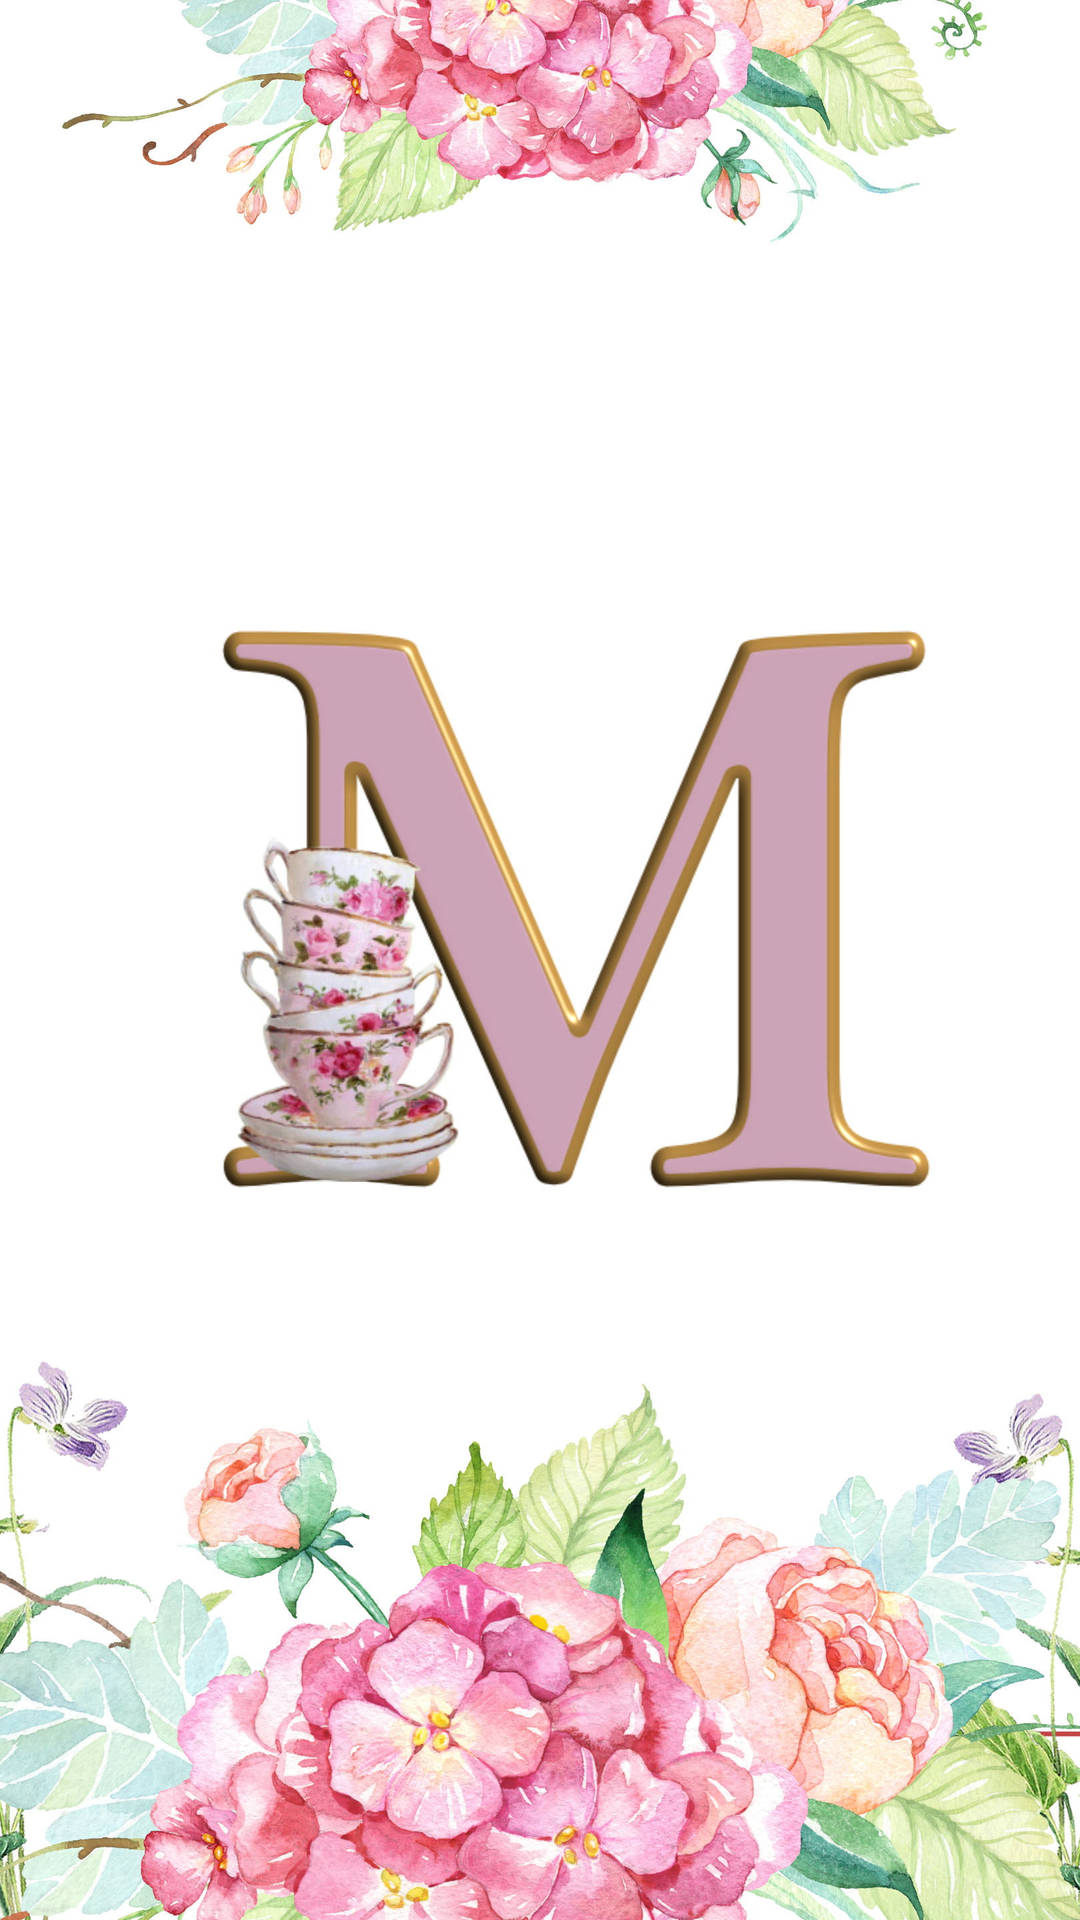 Marvelous M - Beautifully Arranged Letter M Designed With Tea Cups Background